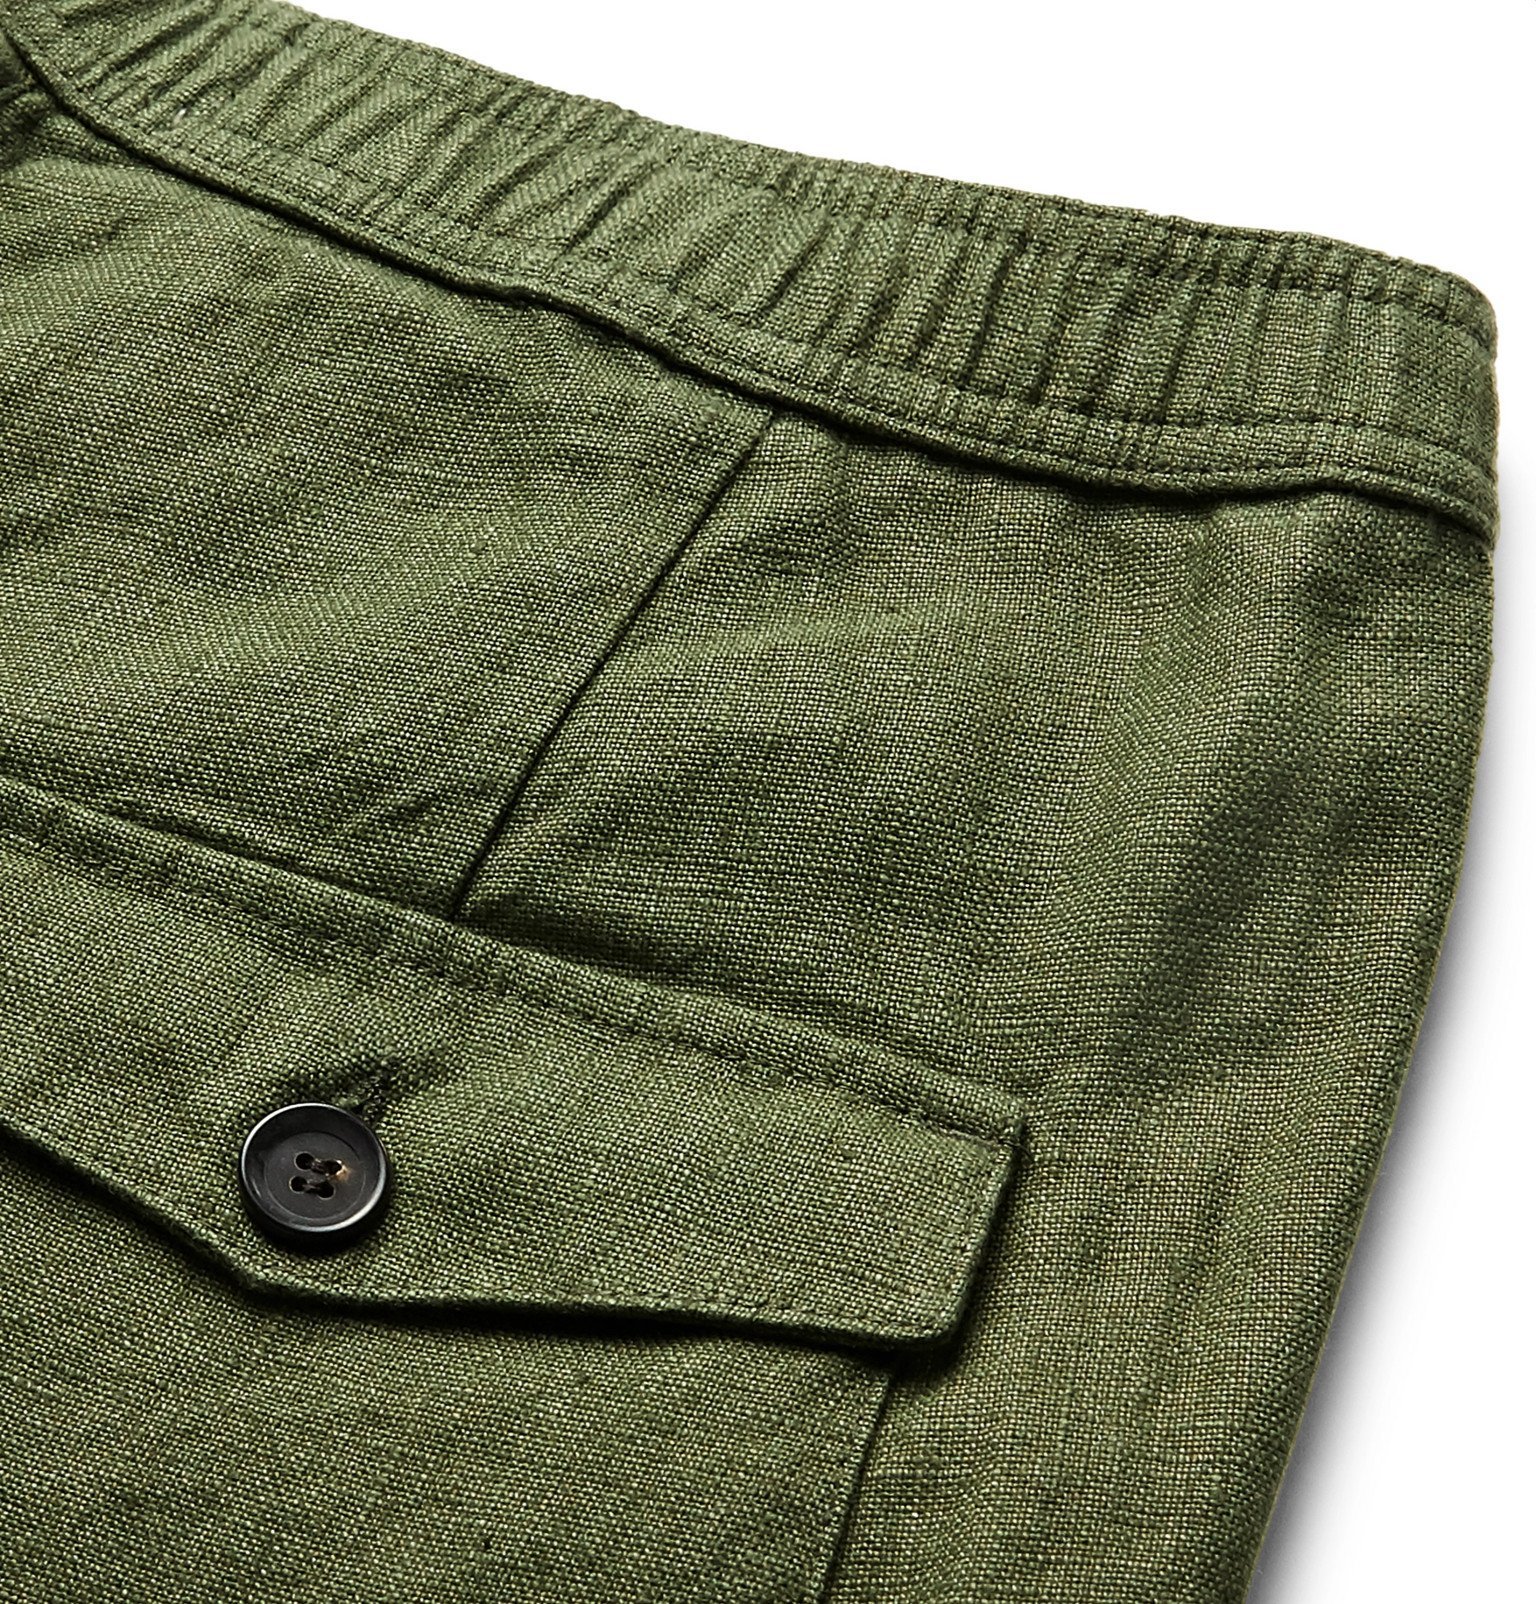 Oliver Spencer - Tapered Linen Trousers - Green